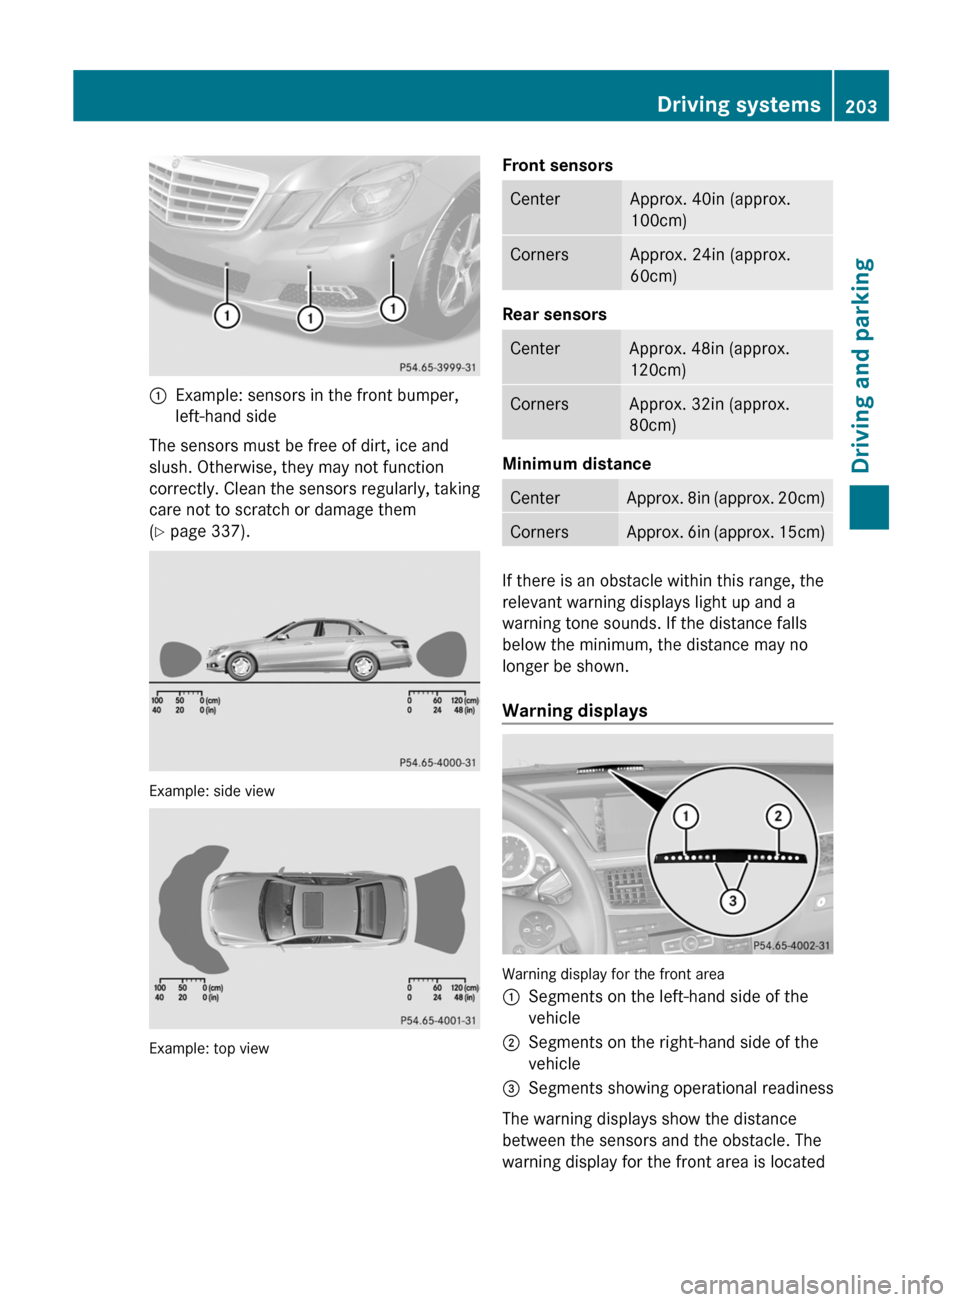 MERCEDES-BENZ E-Class SEDAN 2013 W212 Owners Manual :
Example: sensors in the front bumper,
left-hand side
The sensors must be free of dirt, ice and
slush. Otherwise, they may not function
correctly. 
Clean the sensors regularly, taking
care not to scr